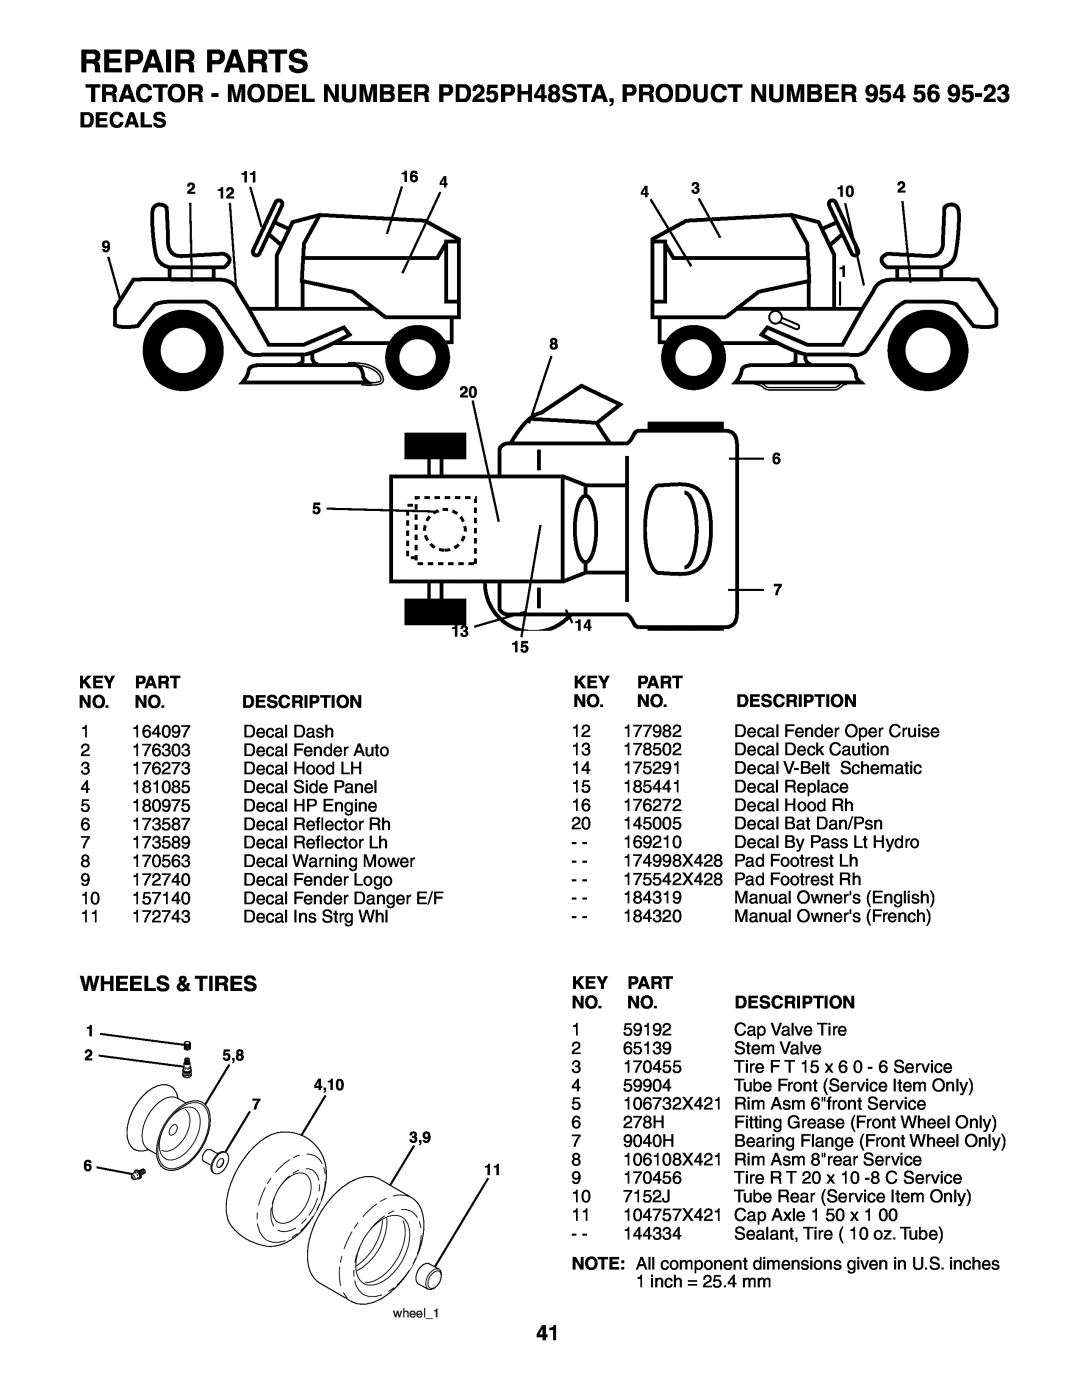 Poulan owner manual Decals, Wheels & Tires, Repair Parts, TRACTOR - MODEL NUMBER PD25PH48STA, PRODUCT NUMBER, 4,10 